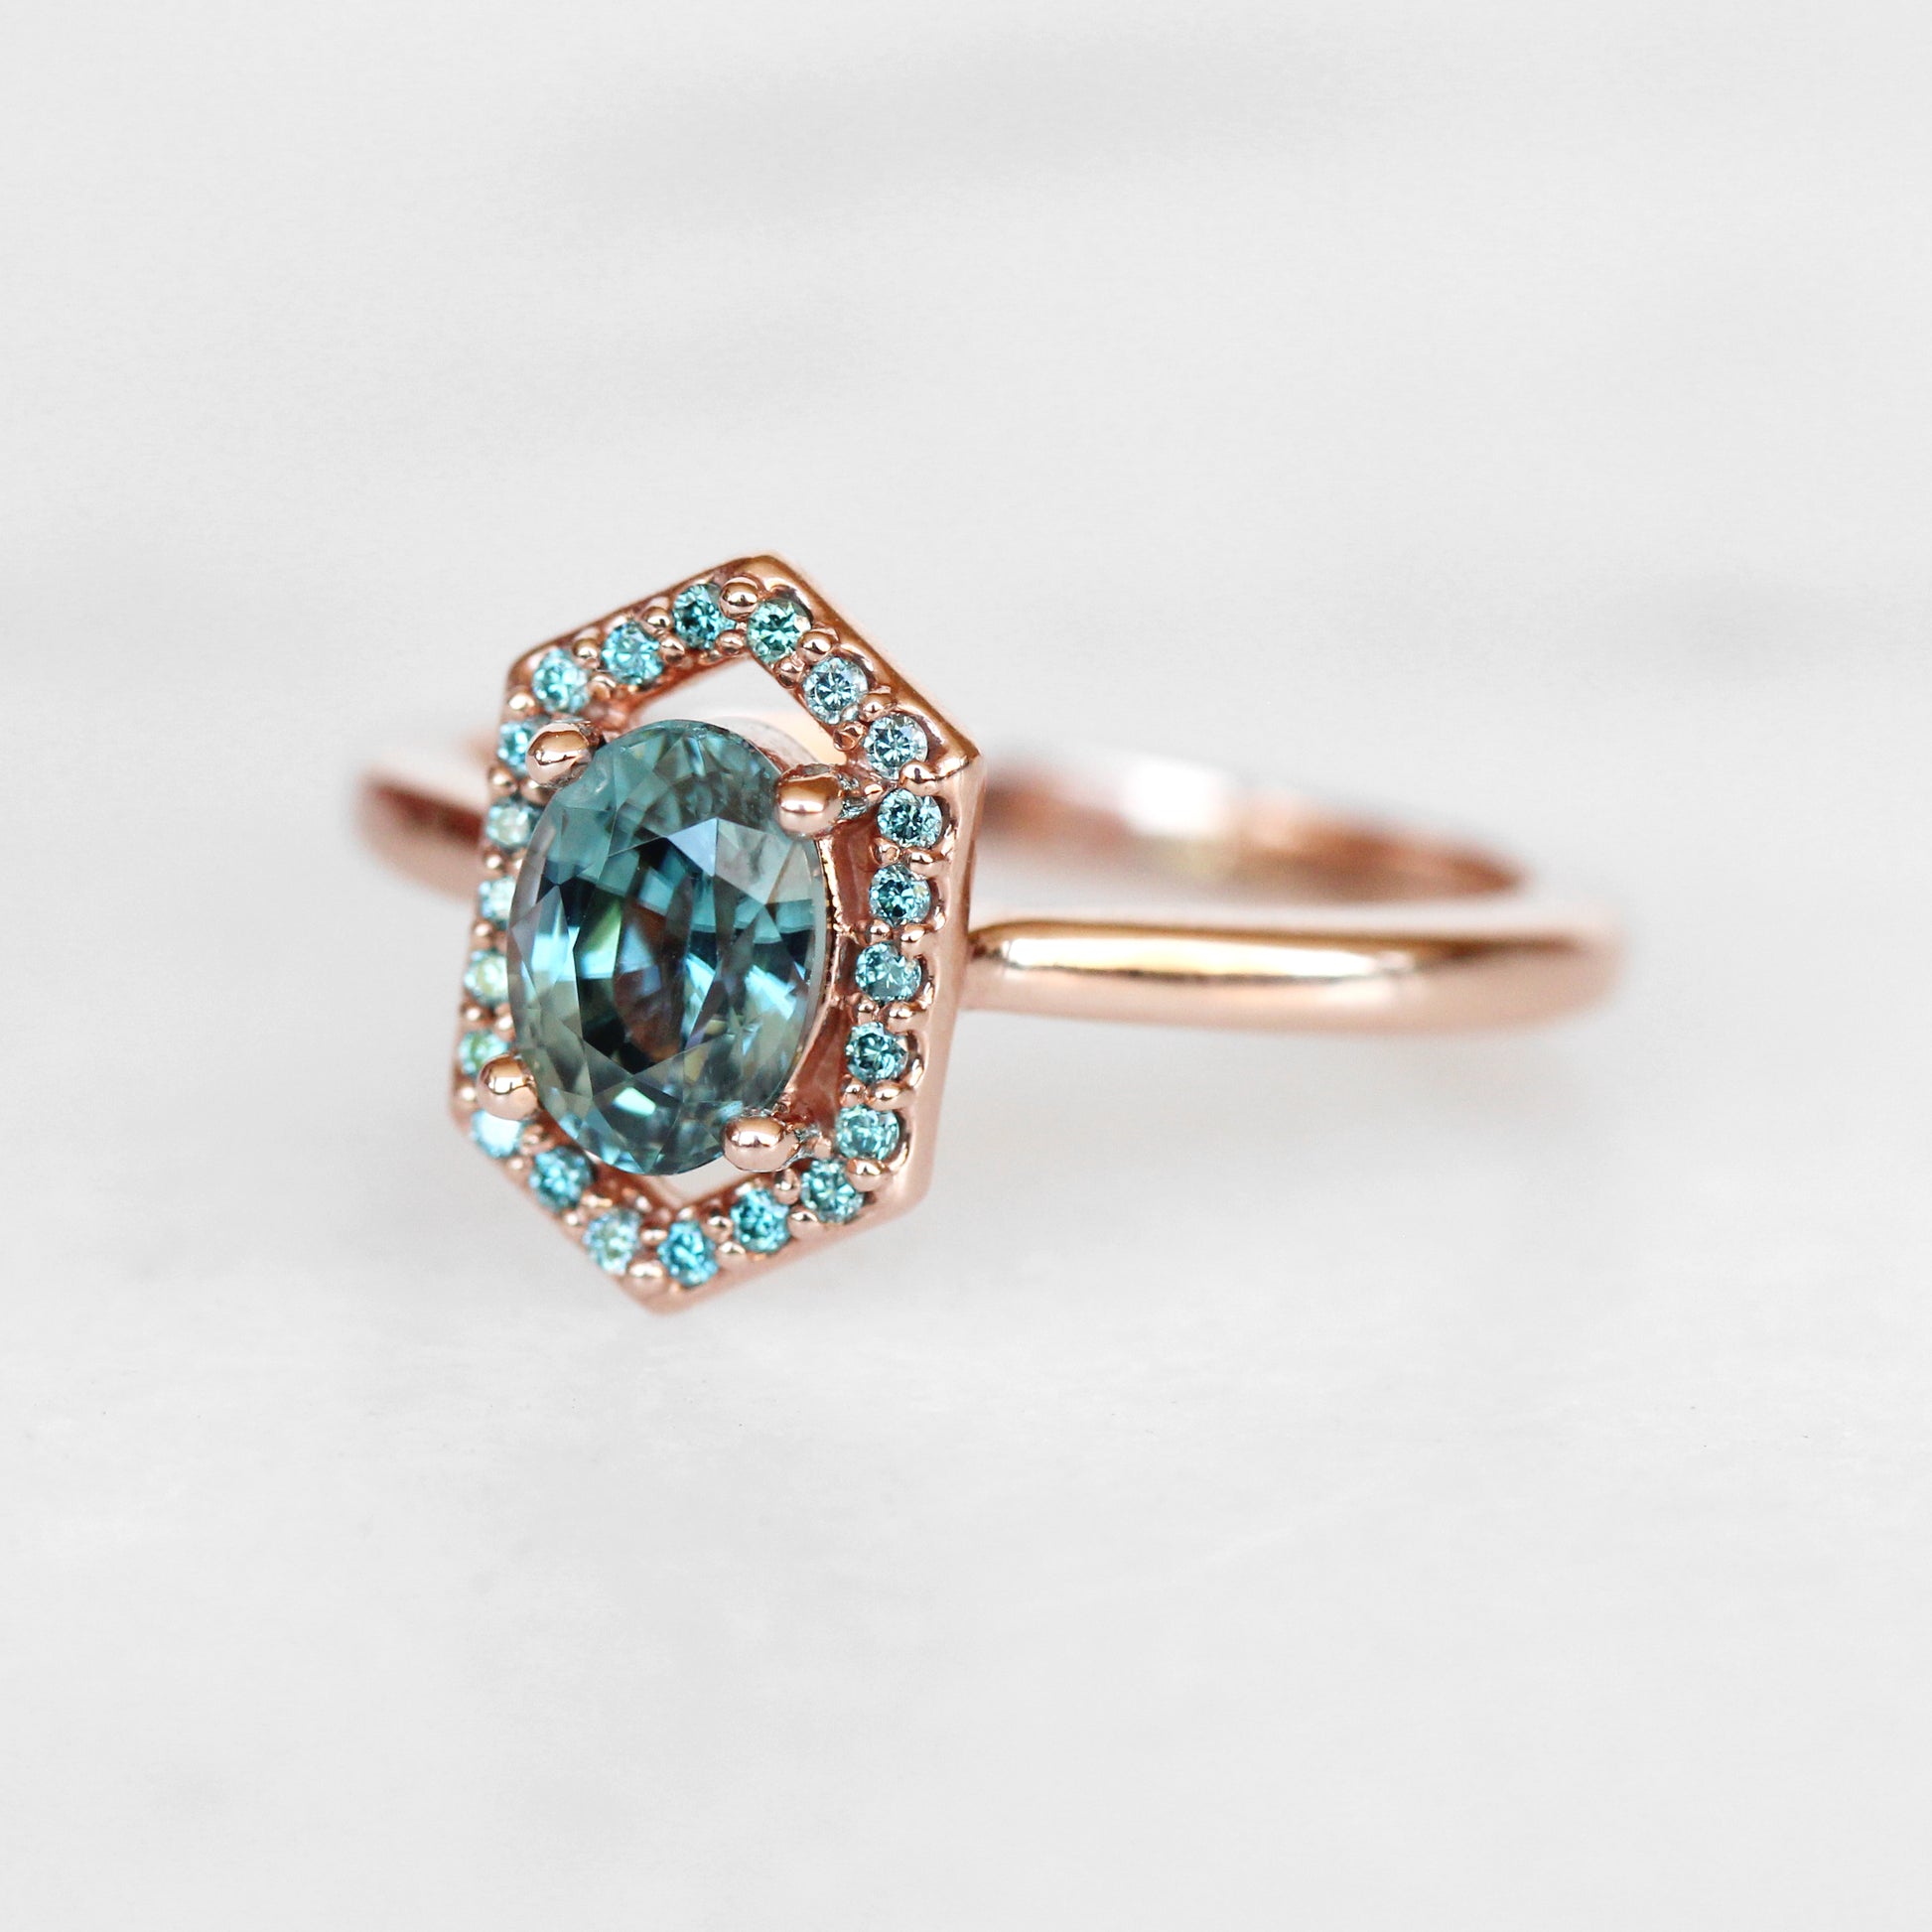 Etta ring with blue zircon and aqua diamonds - 14k gold of choice - made to order - Midwinter Co. Alternative Bridal Rings and Modern Fine Jewelry